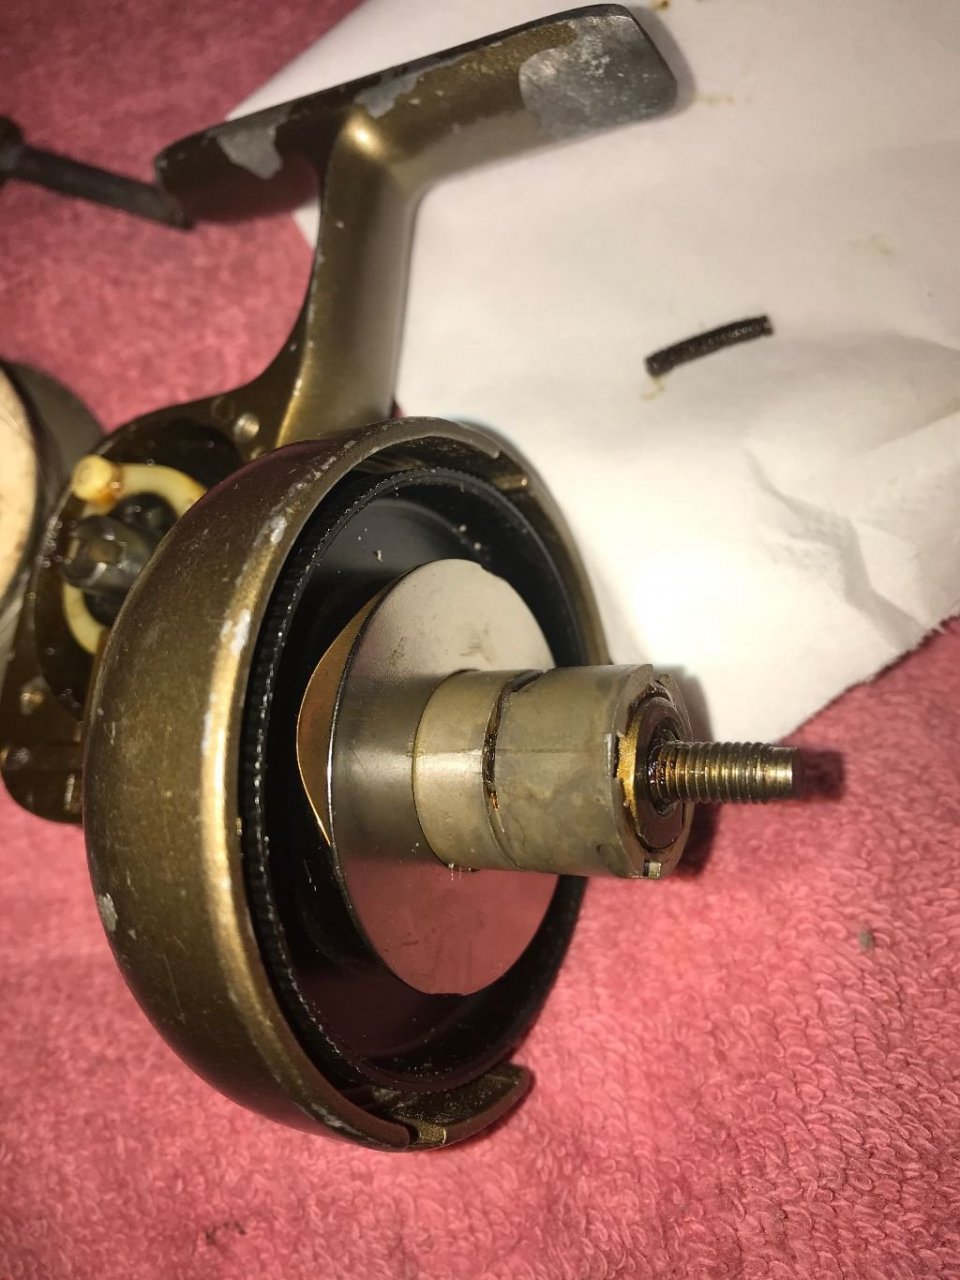 Heddon 200 Spin Pal Underspin- Need Schematic / Dissasembly Help